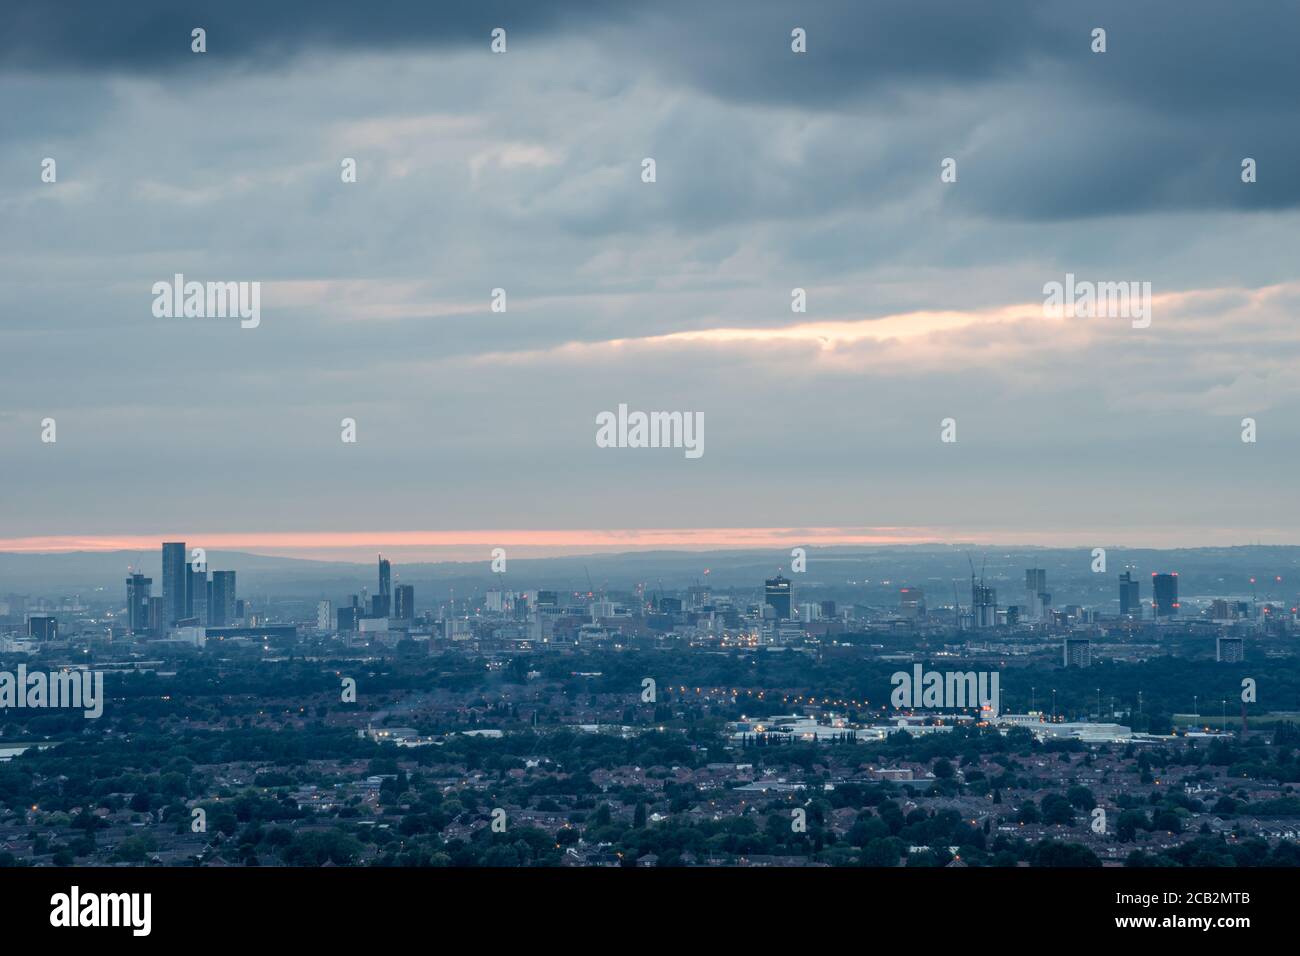 Manchester city skyline as seen from the east, August 2020. Manny, Manc, 0161, cottonopolis, madchester, warehouse city, the rainy city. England UK. Stock Photo